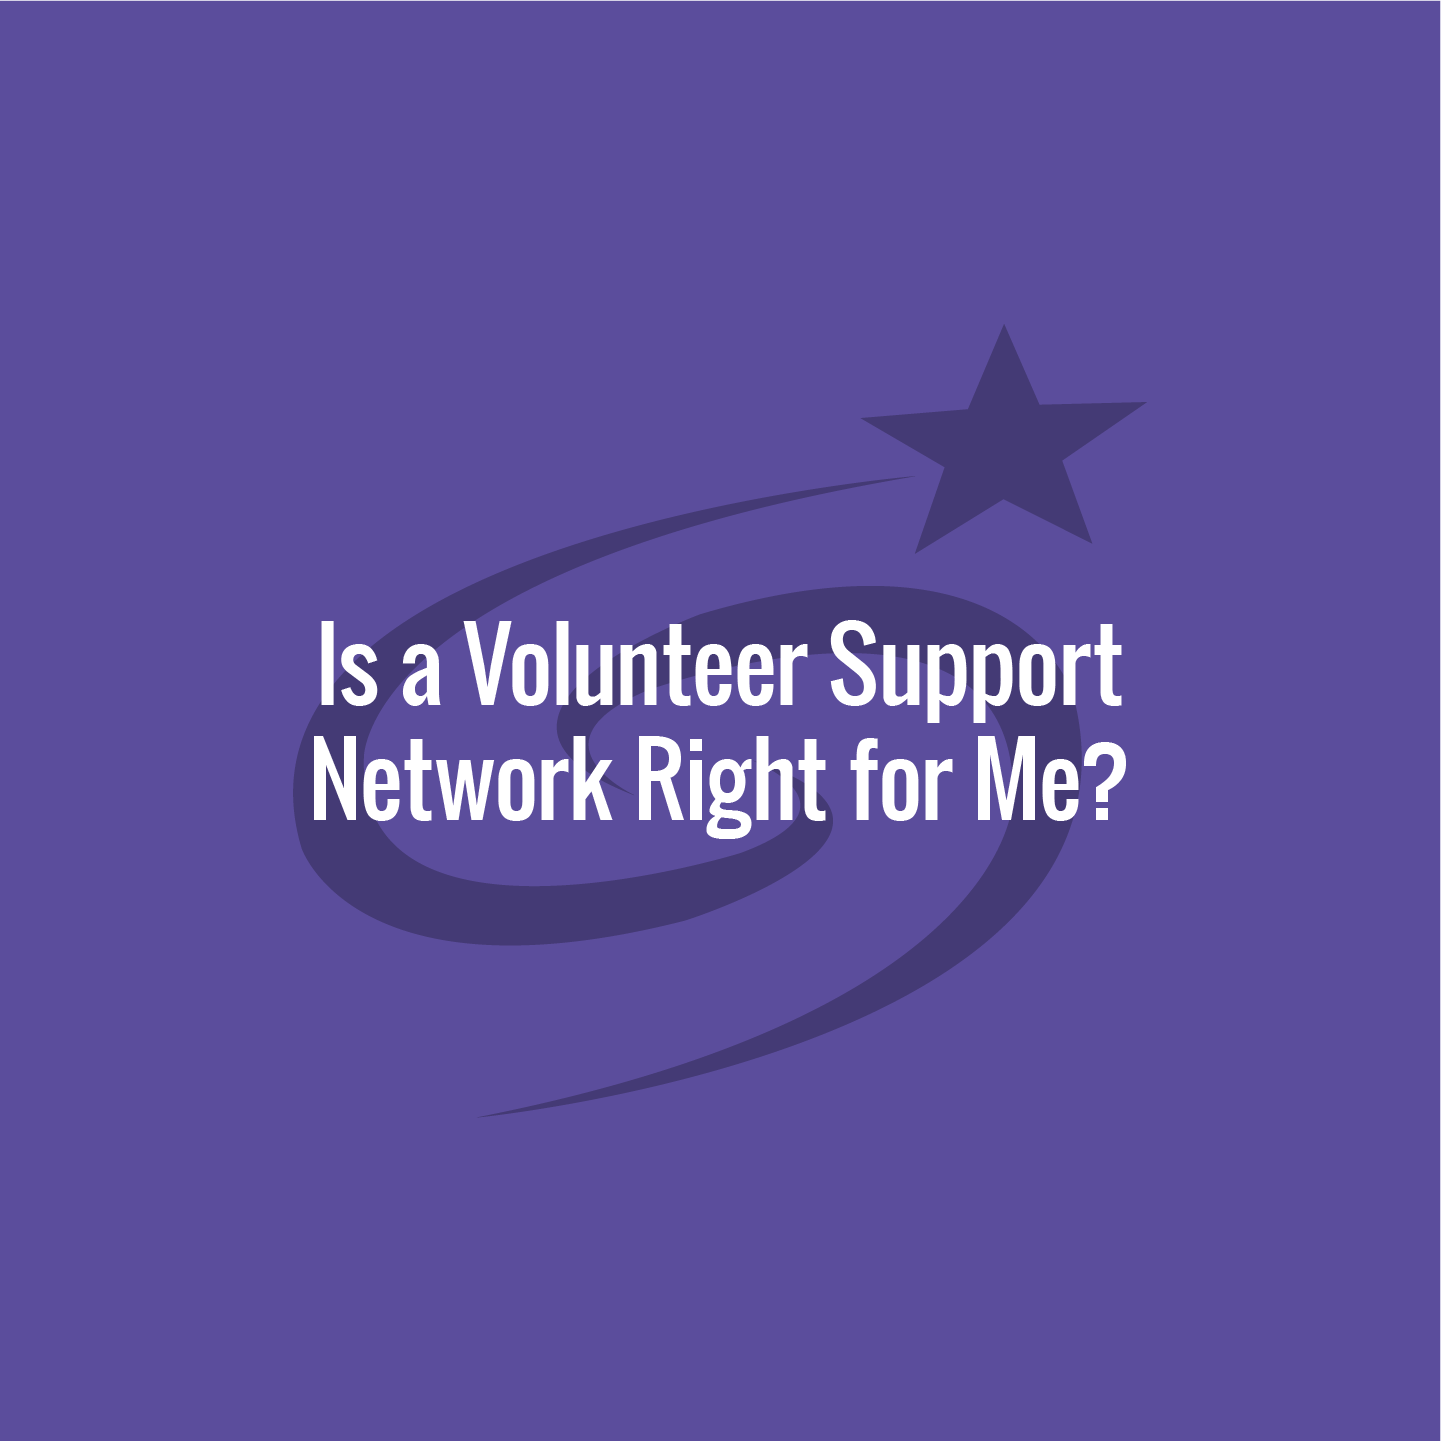 Is a Volunteer Support Network Right for Me?